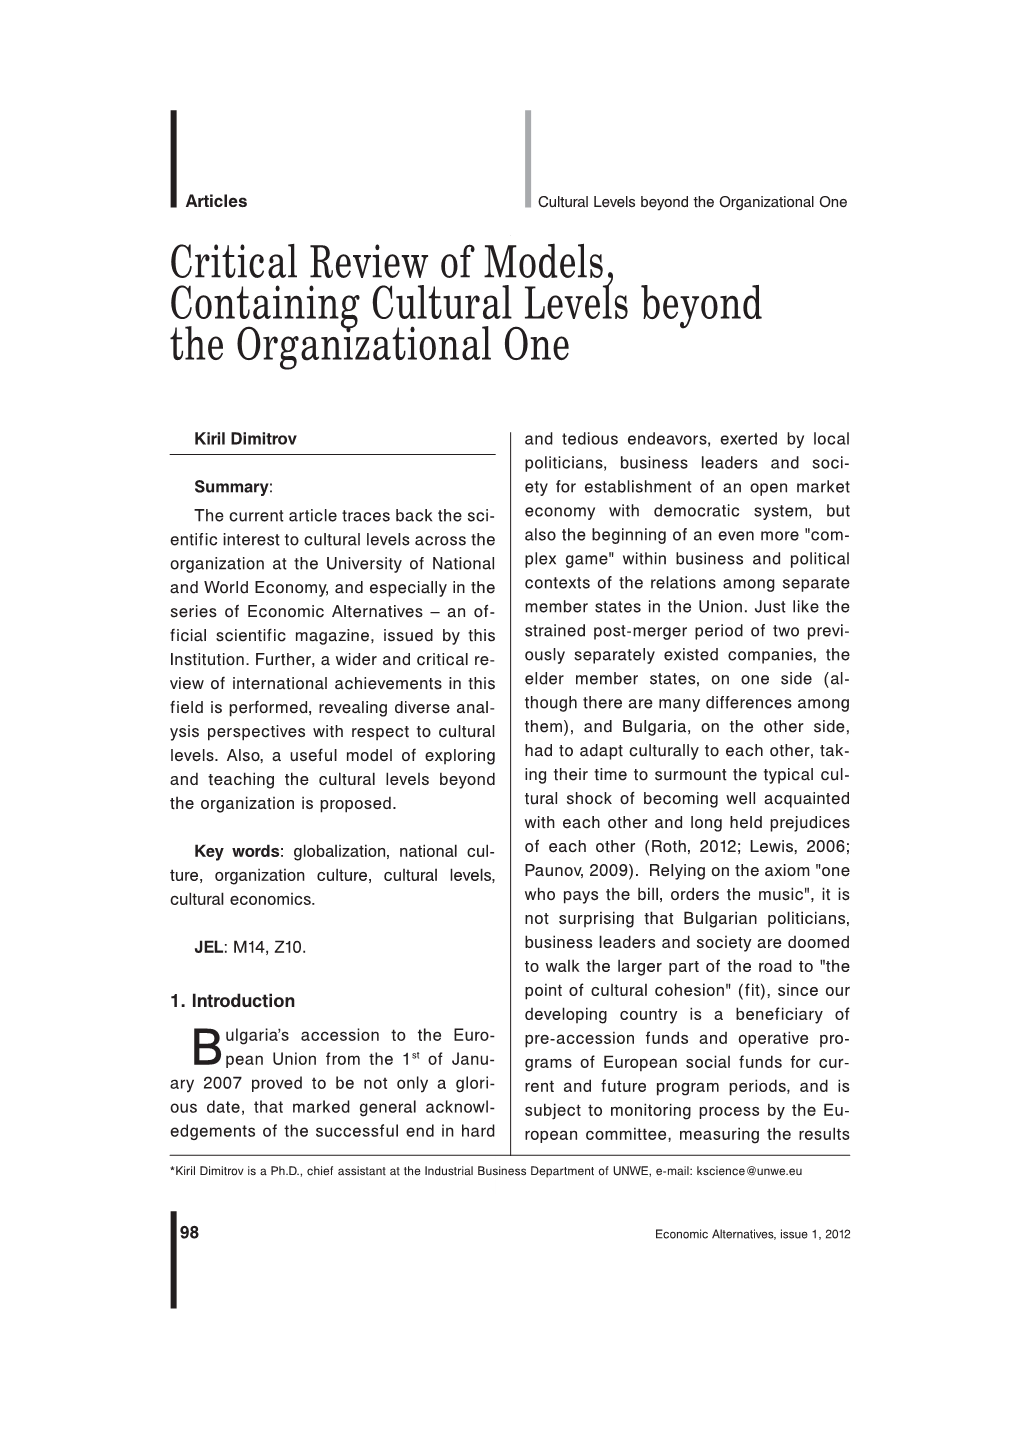 Critical Review of Models, Containing Cultural Levels Beyond the Organizational One